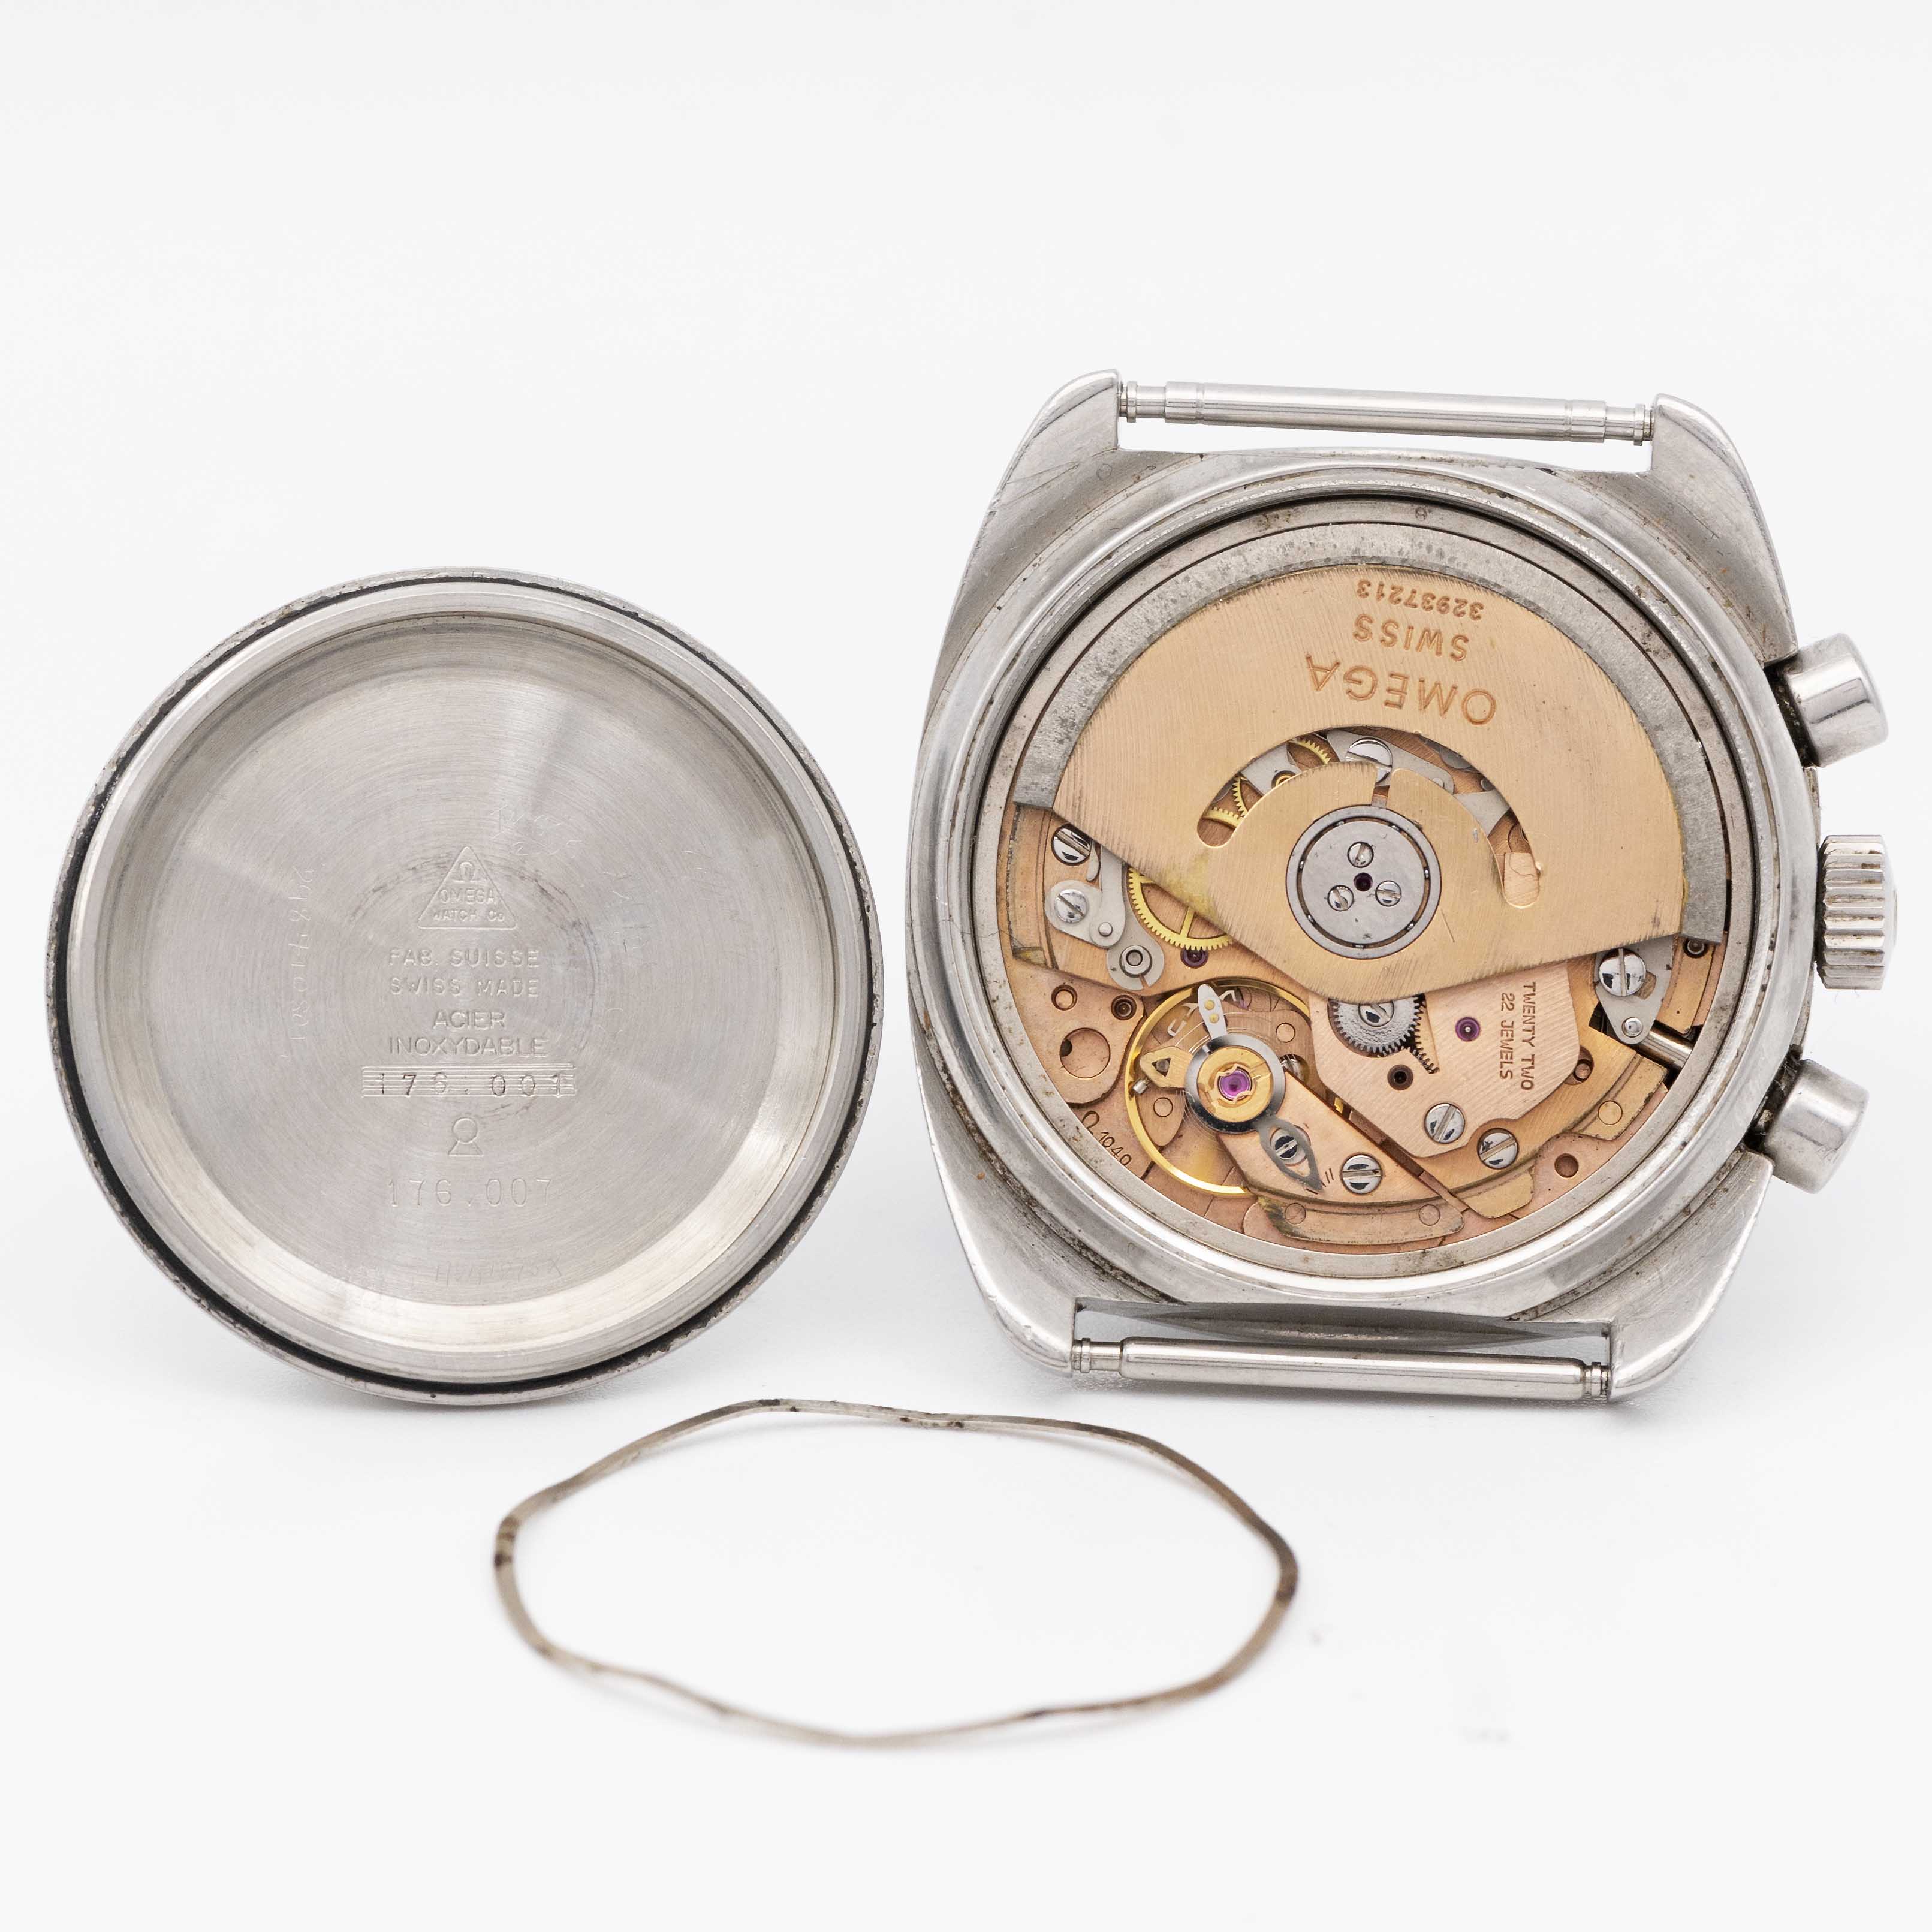 A GENTLEMAN'S STAINLESS STEEL OMEGA SEAMASTER AUTOMATIC CHRONOGRAPH BRACELET WATCH DATED 1979, - Image 6 of 8